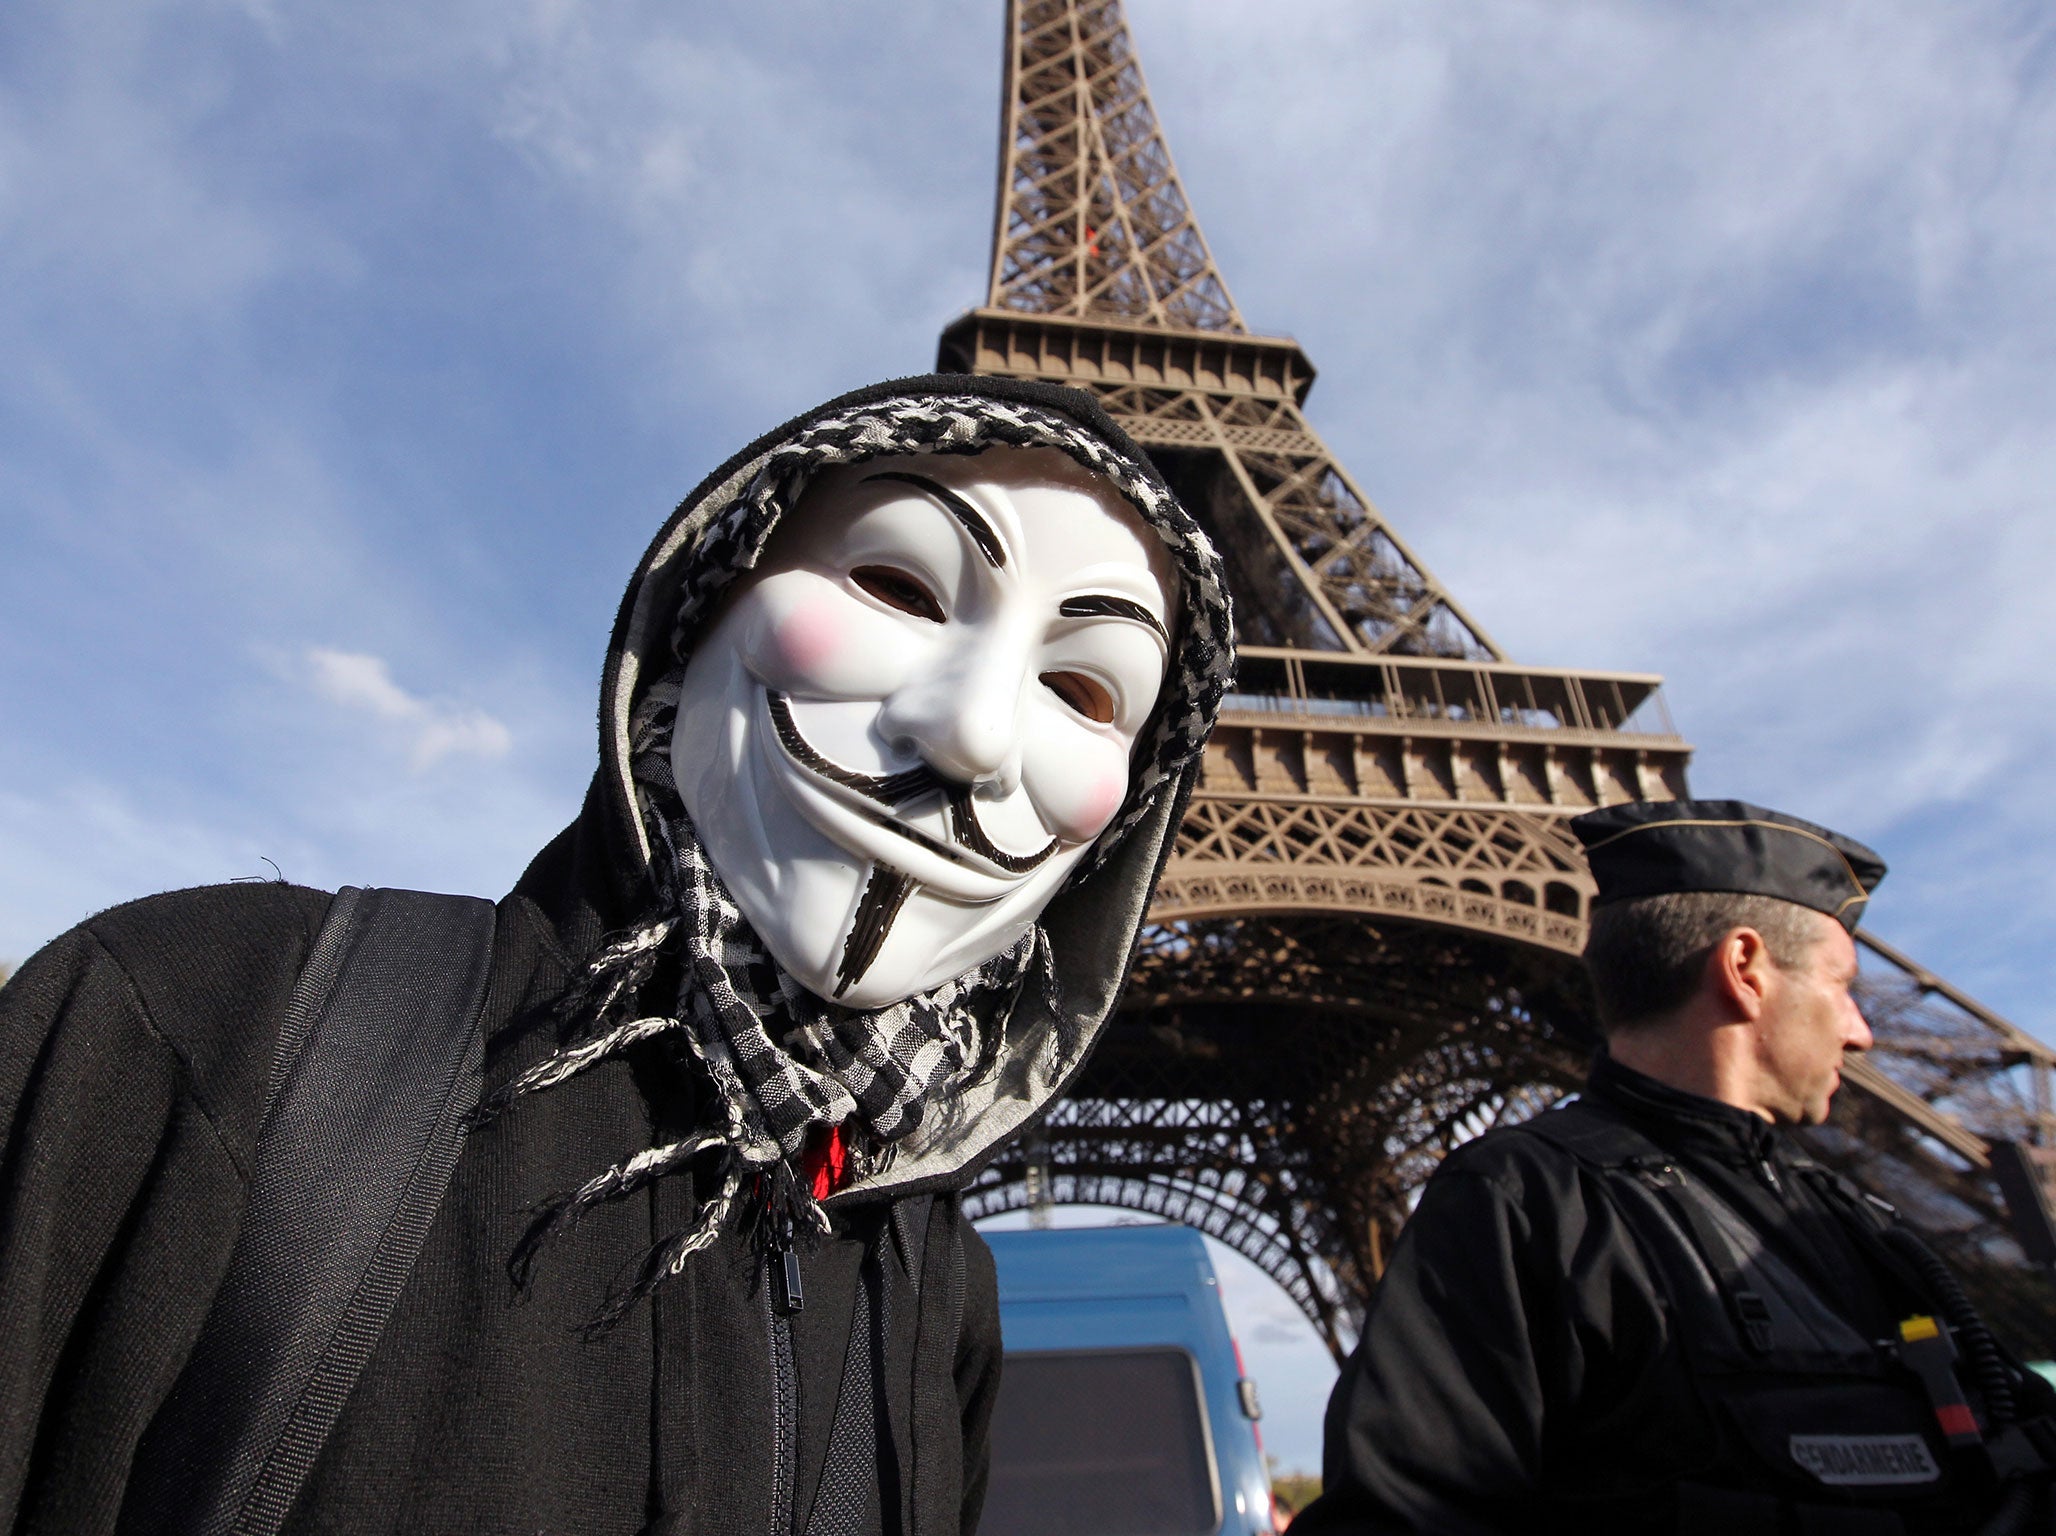 A protester wearing an Anonymous Guy Fawkes mask takes part in a demonstration in front of the Eiffel tower in Paris